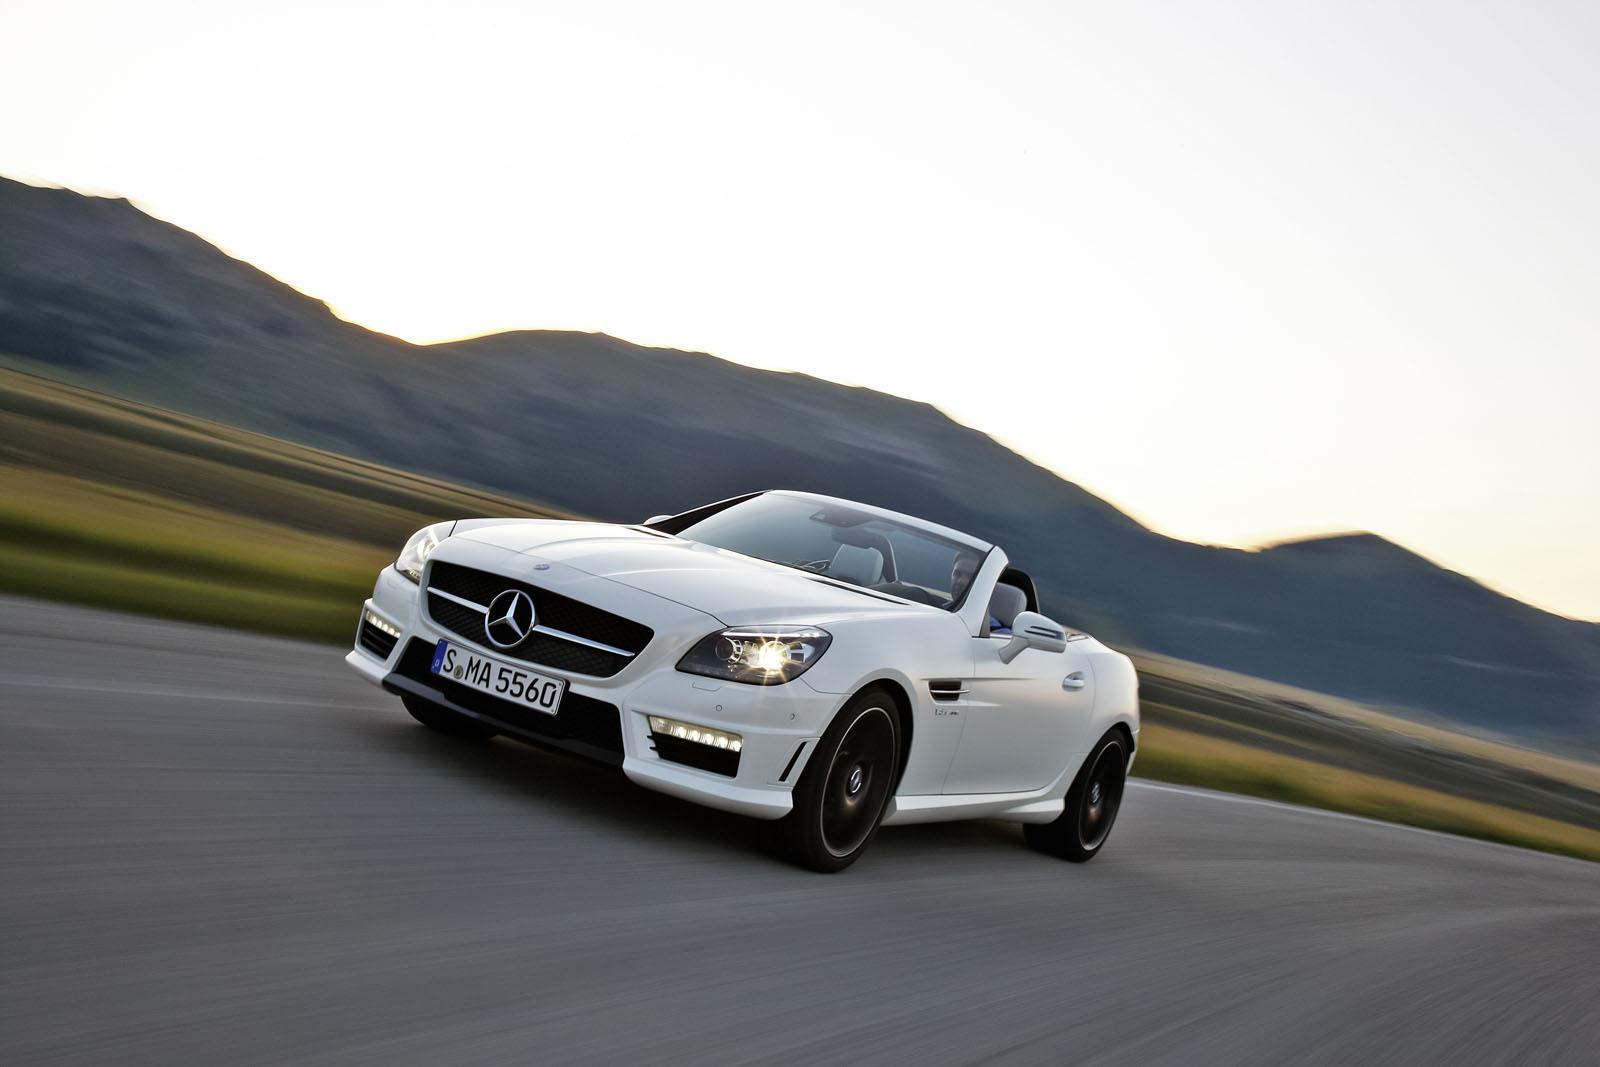 Mercedes SLK 55 AMG prices 2012 photo 74635 picture at high resolution